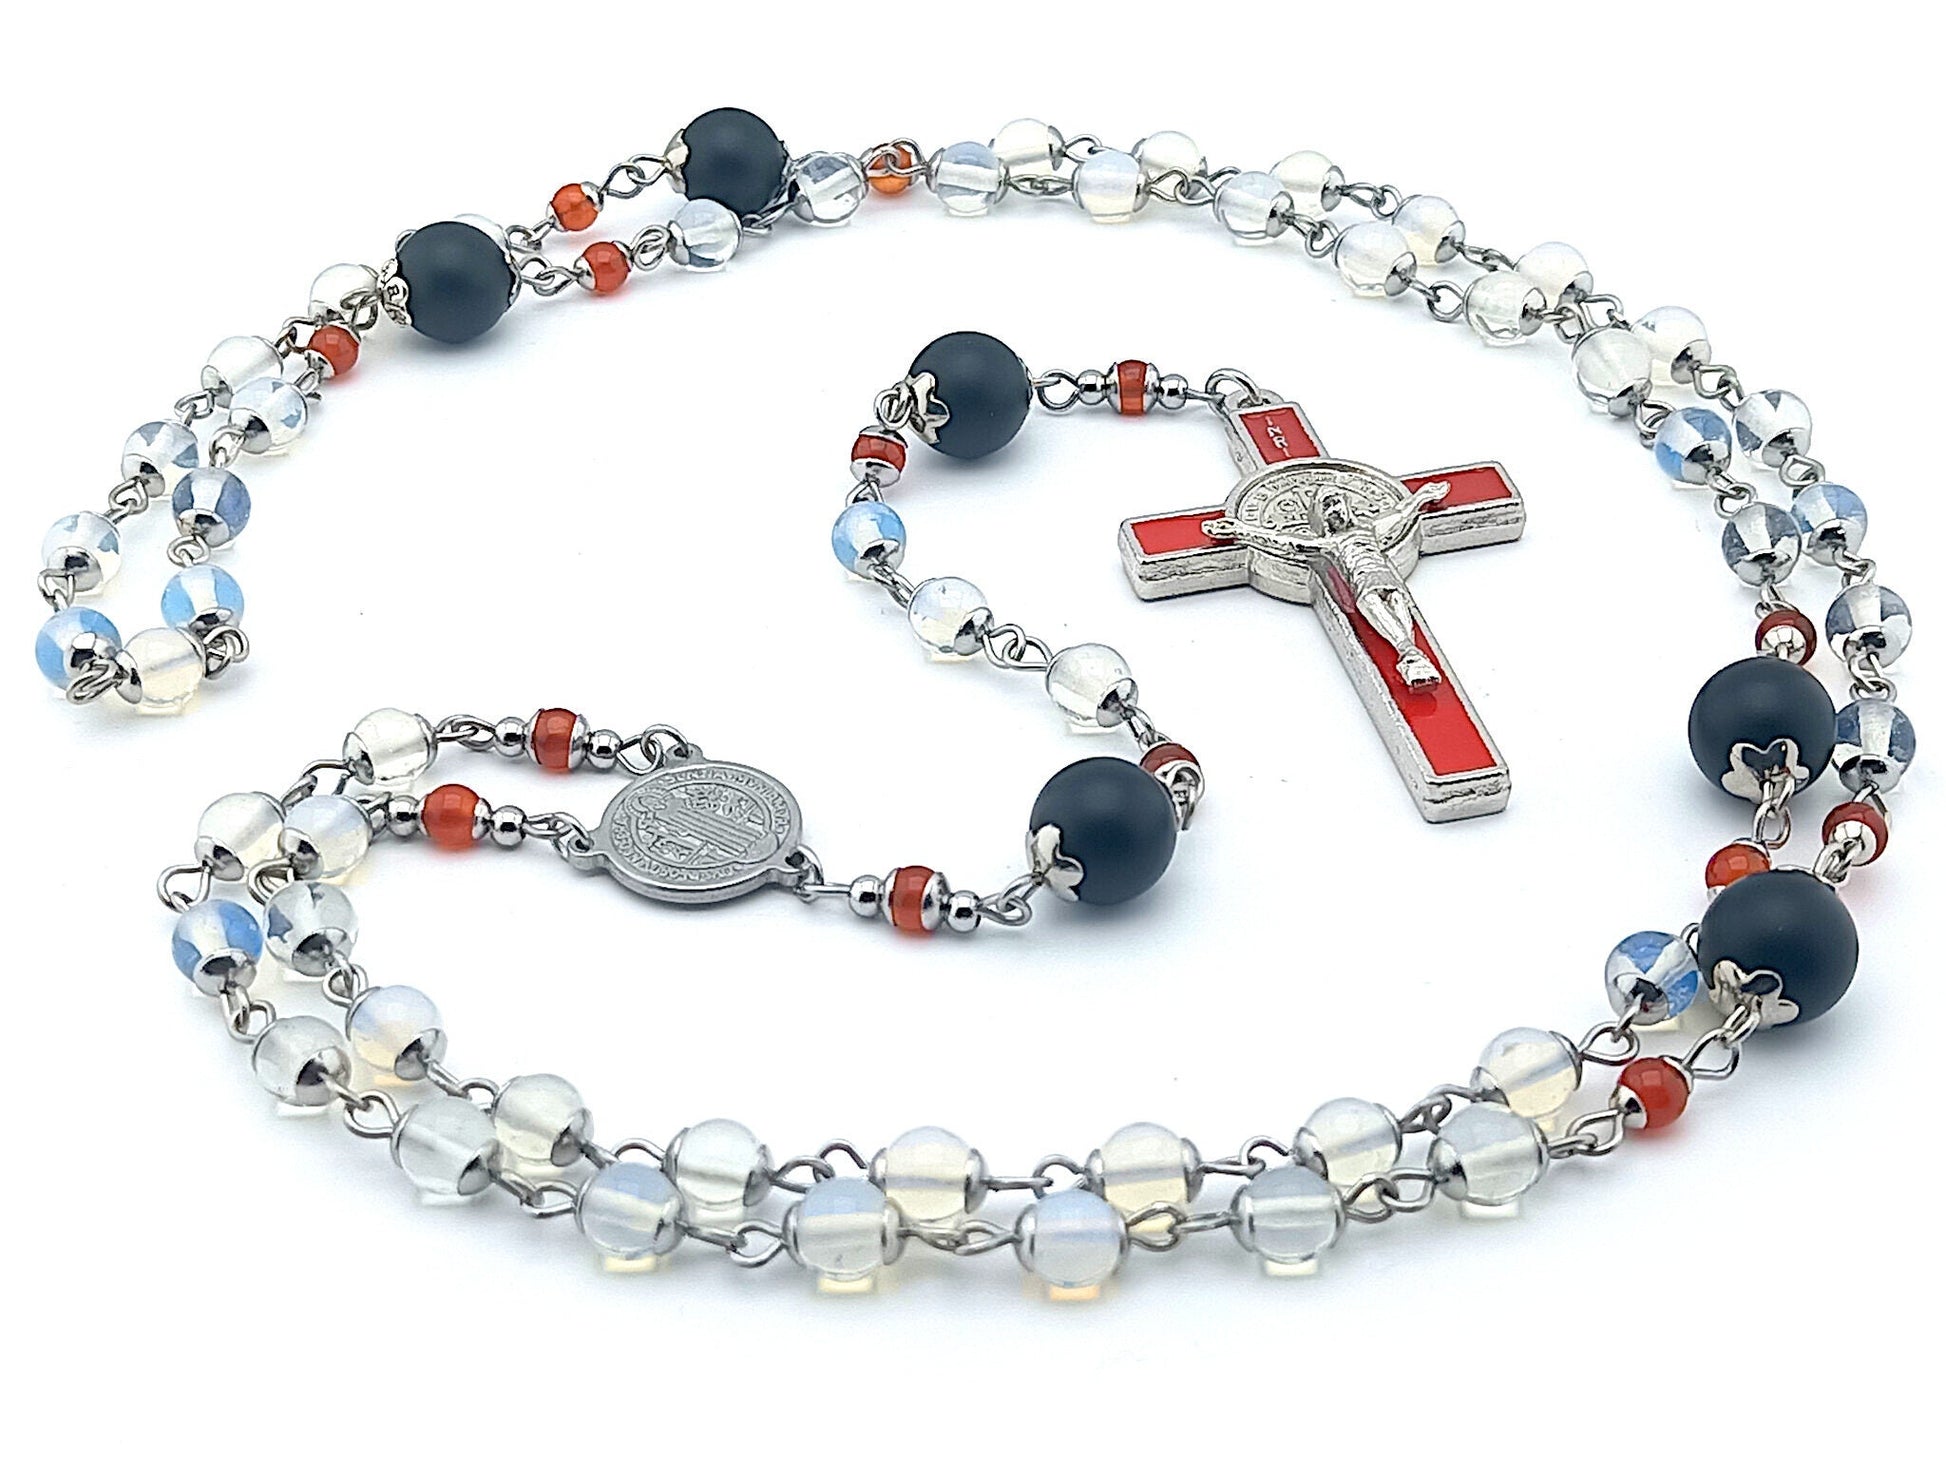 Saint Benedict unique rosary beads with opaline and onyx gemstone beads, red and silver enamel crucifix and stainless steel centre medal.